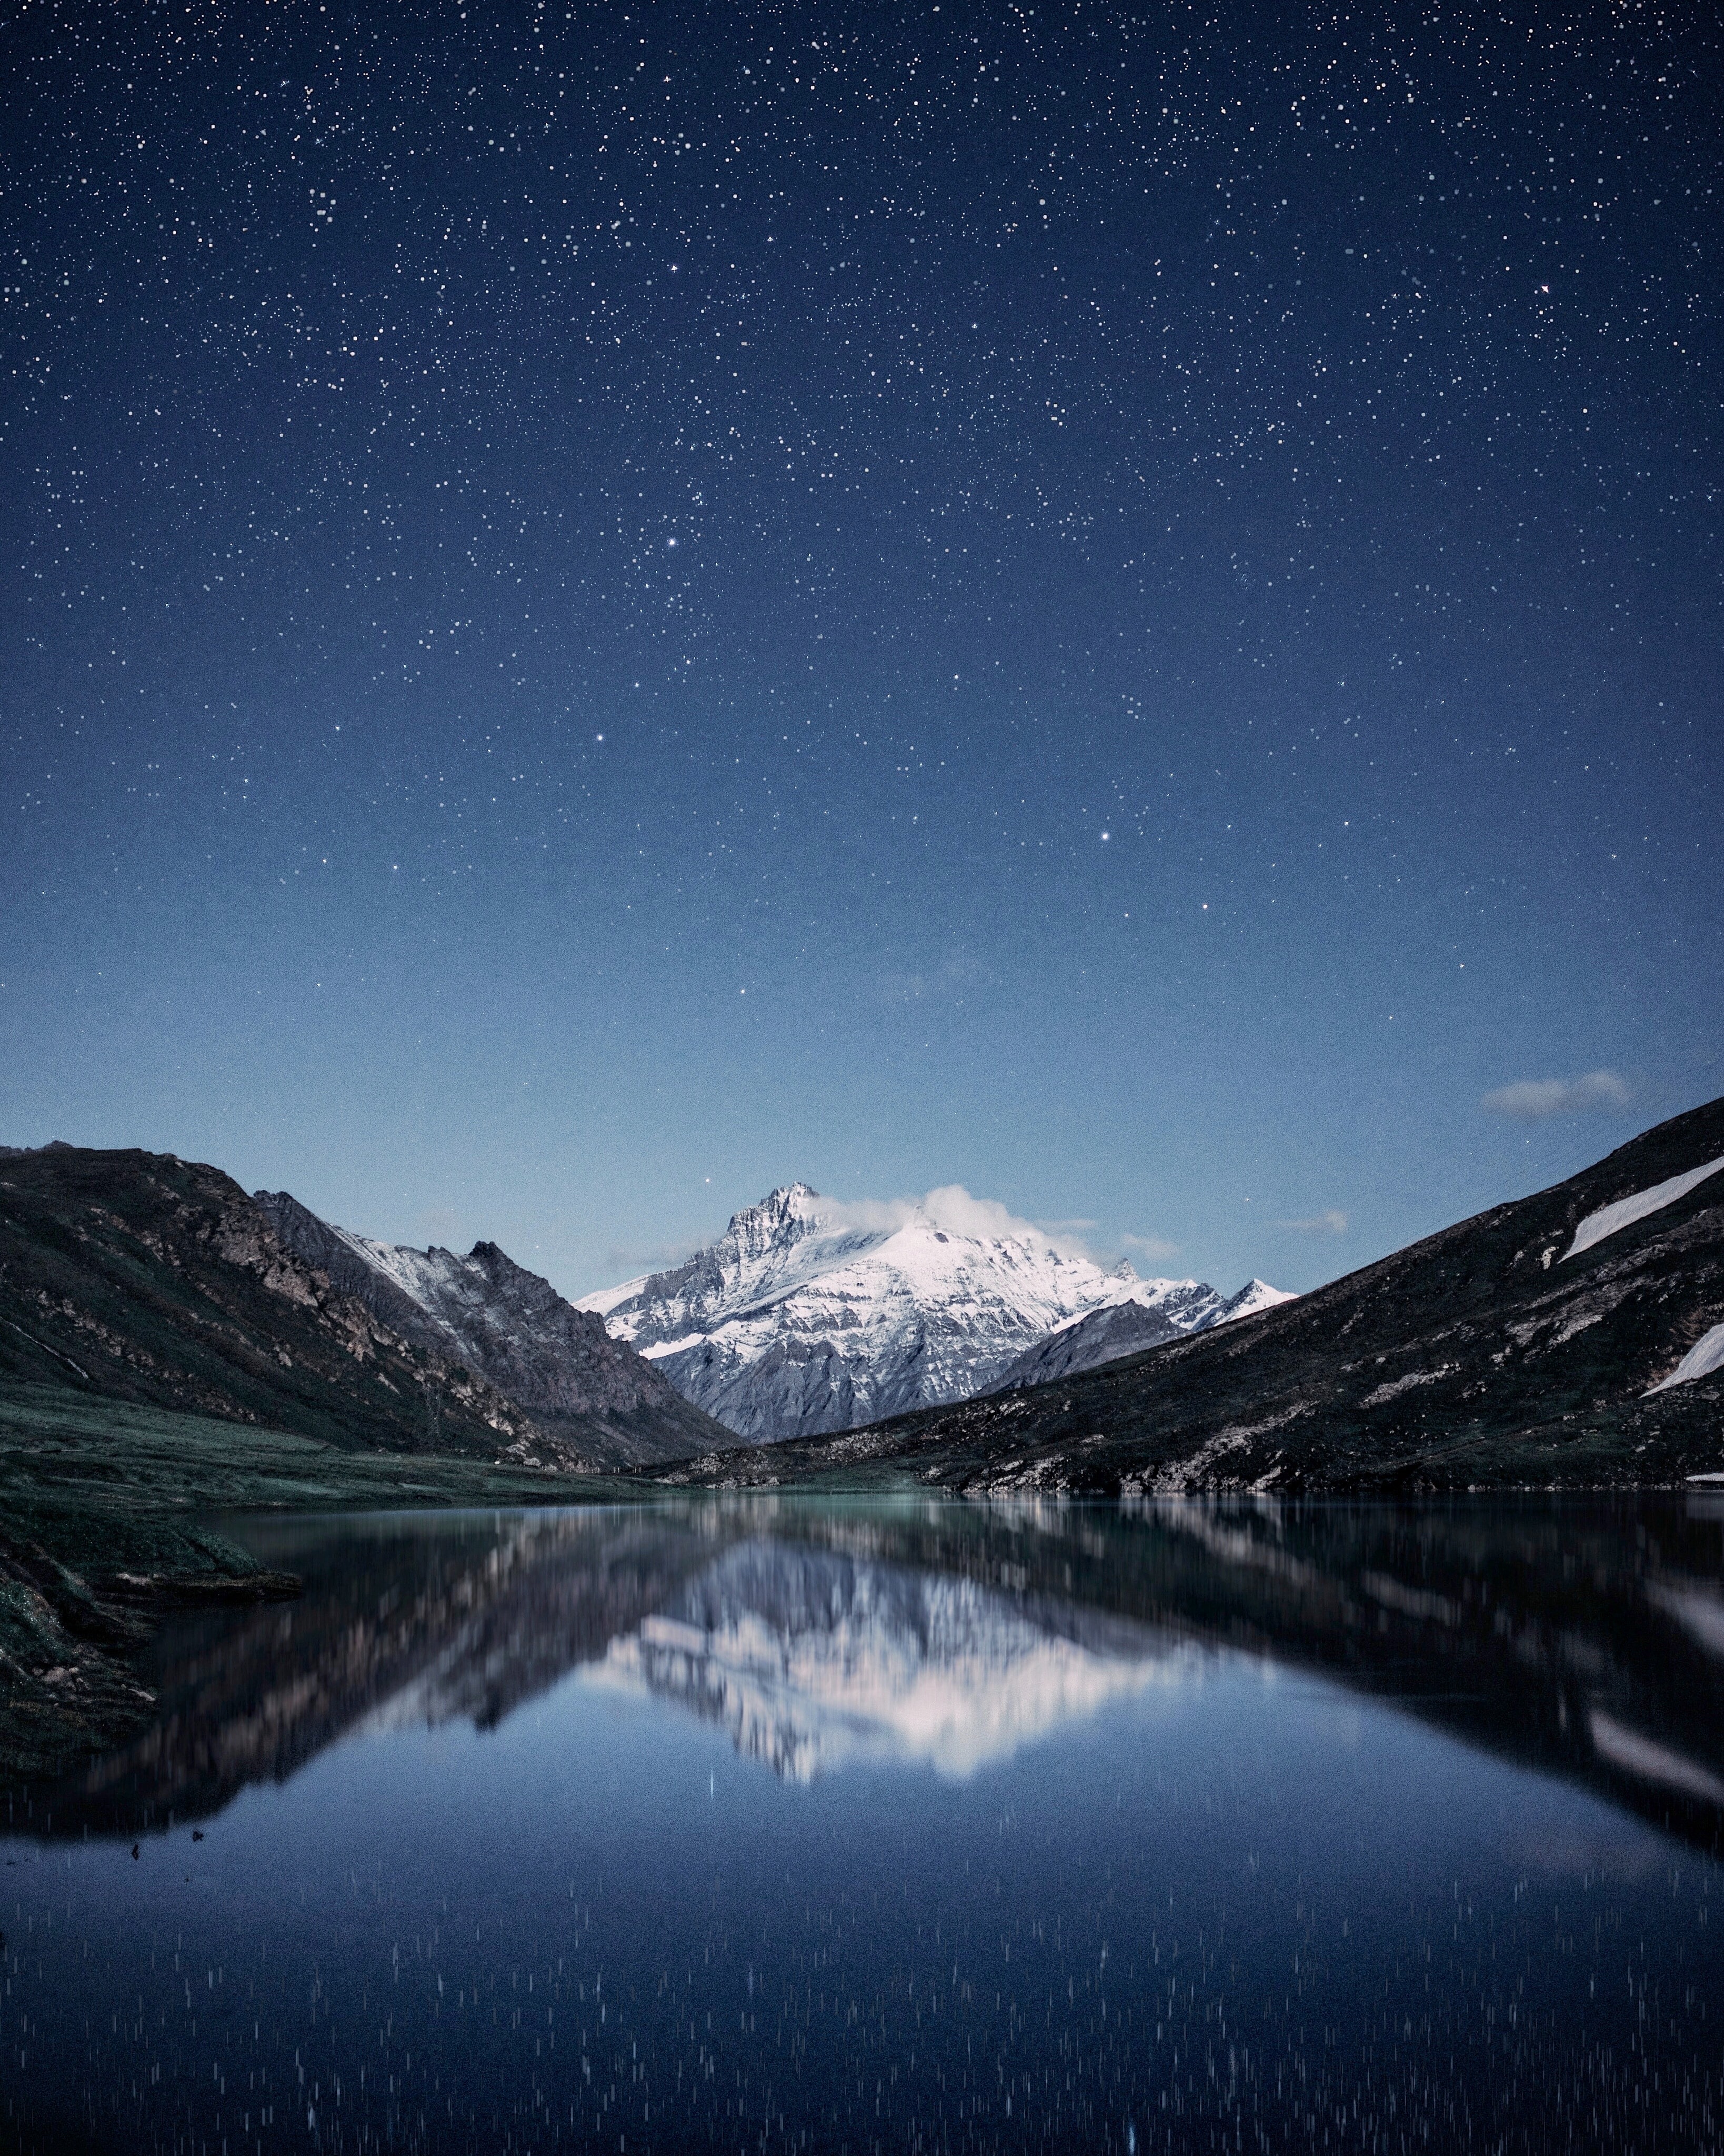 1920x1080 Background snowbound, snow covered, nature, mountains, night, reflection, starry sky